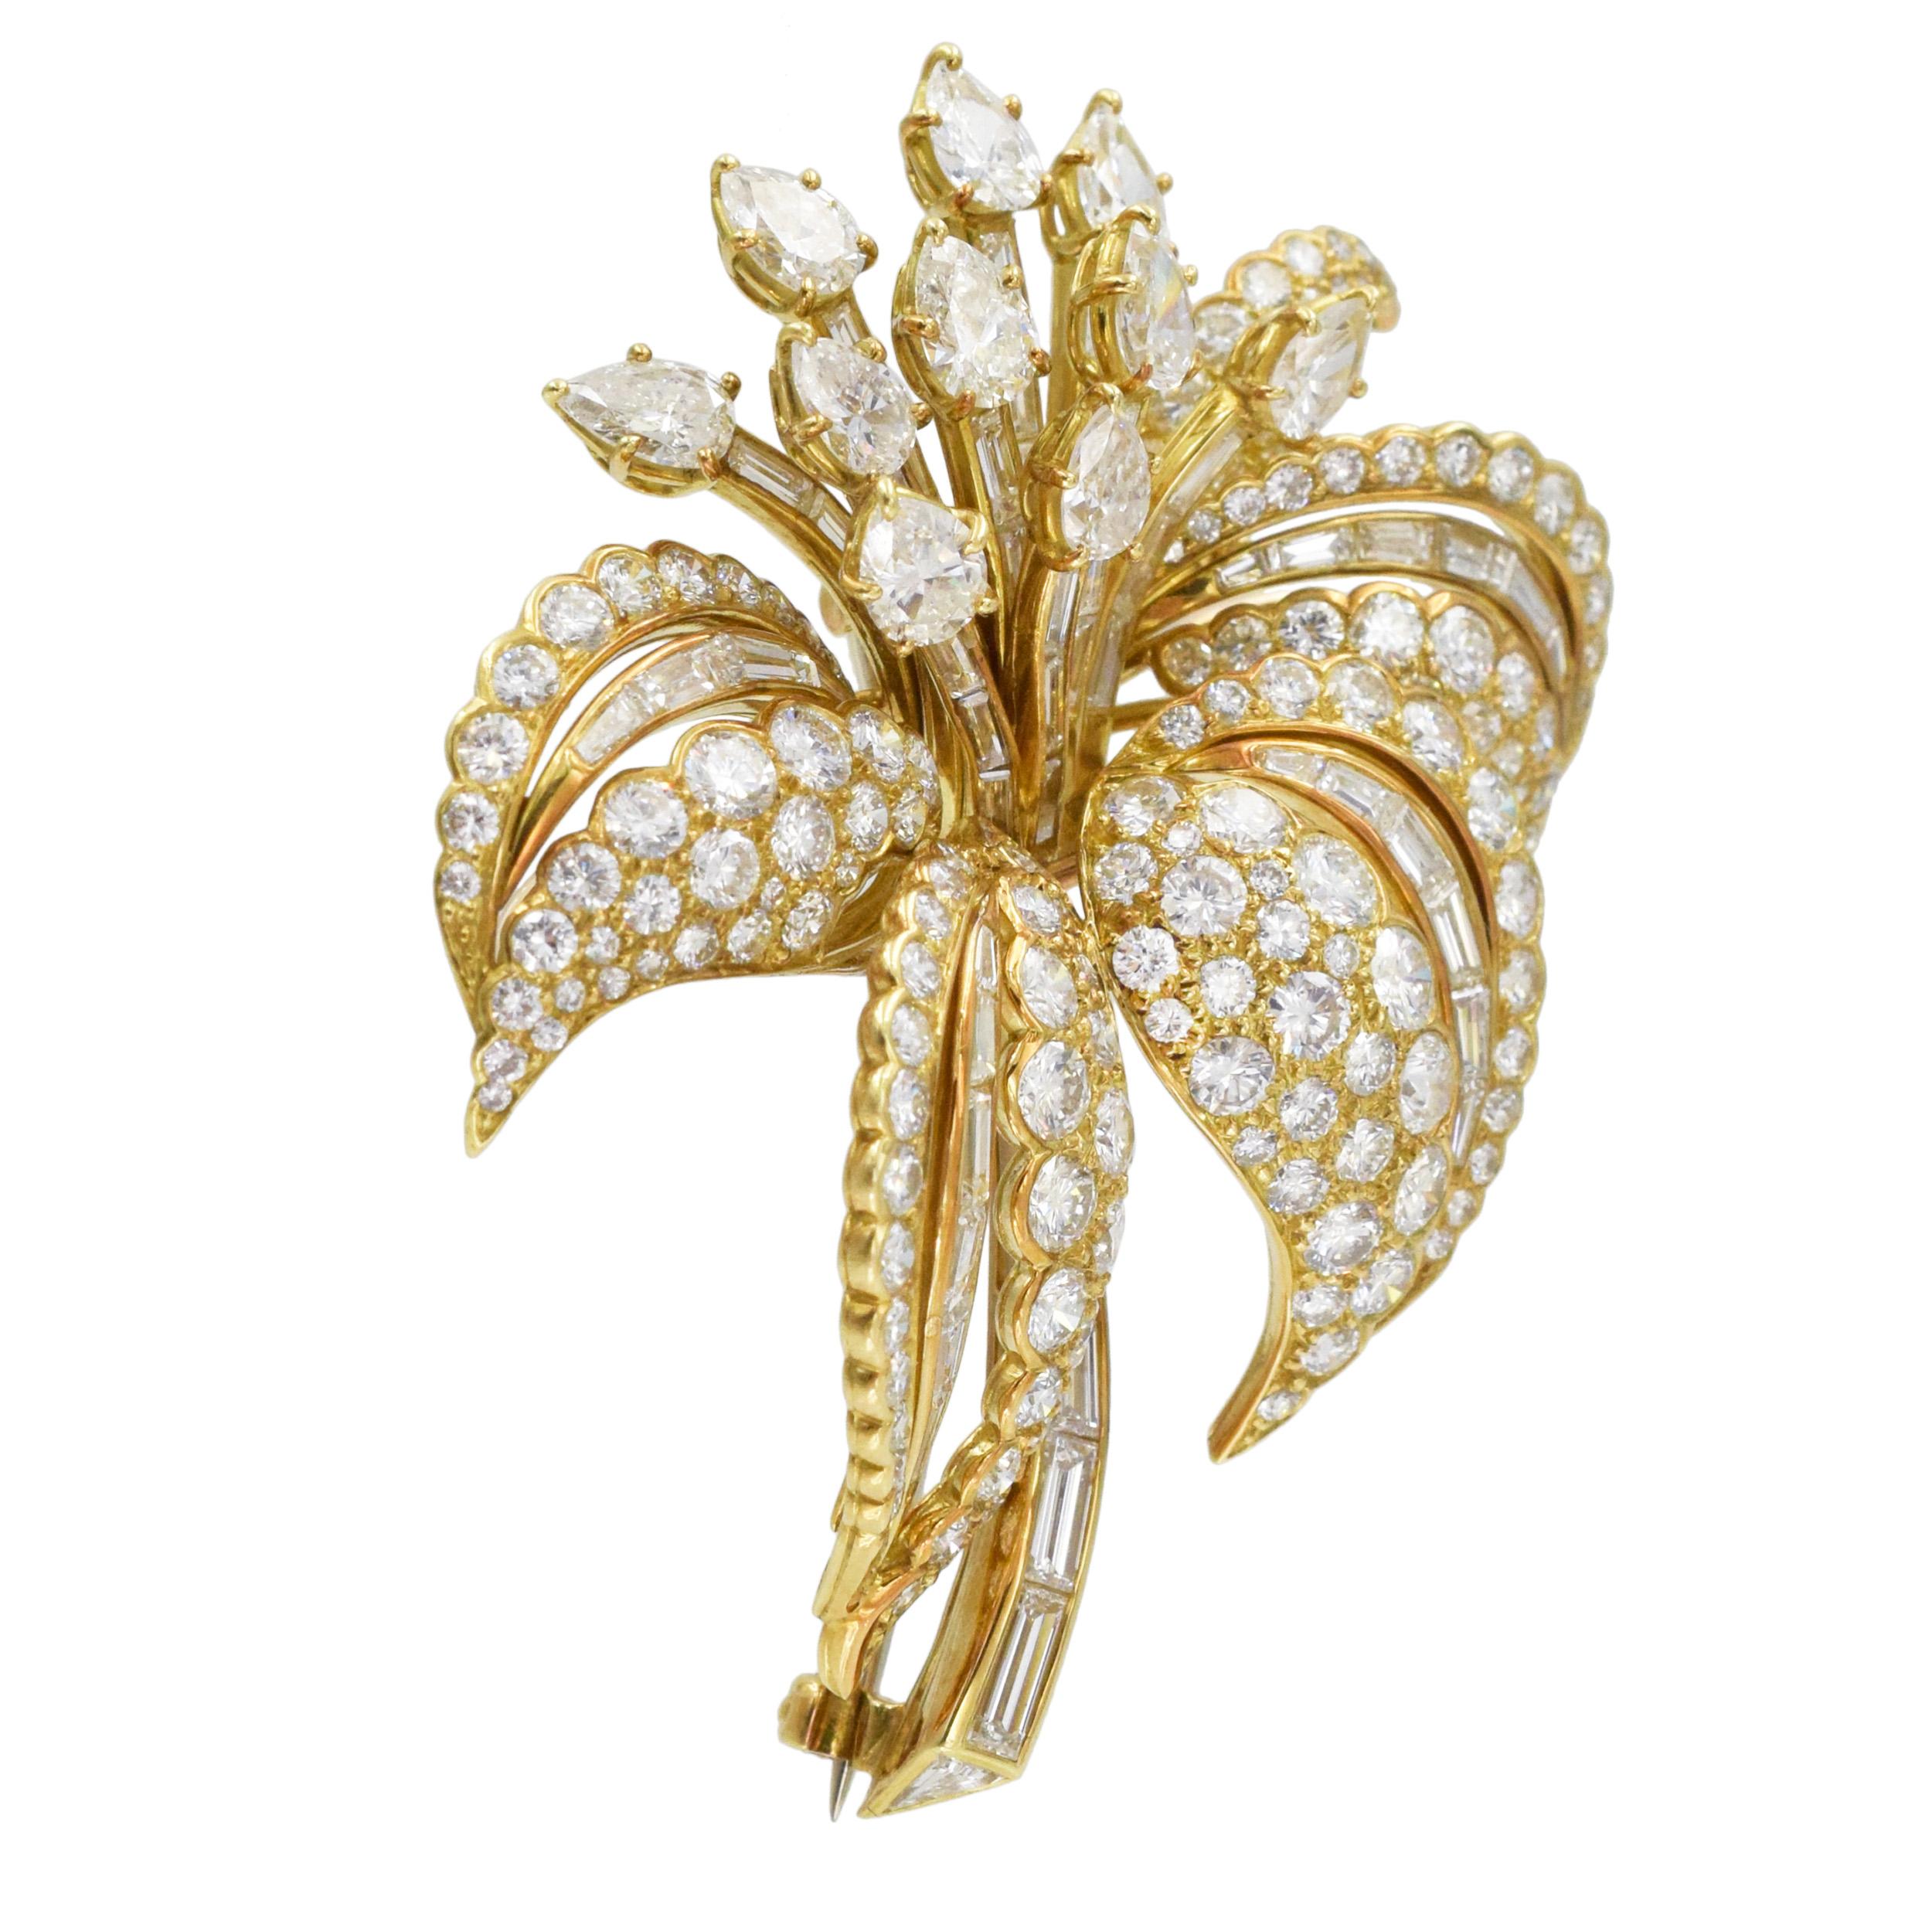 Cartier Diamond Flower Brooch In Excellent Condition For Sale In New York, NY